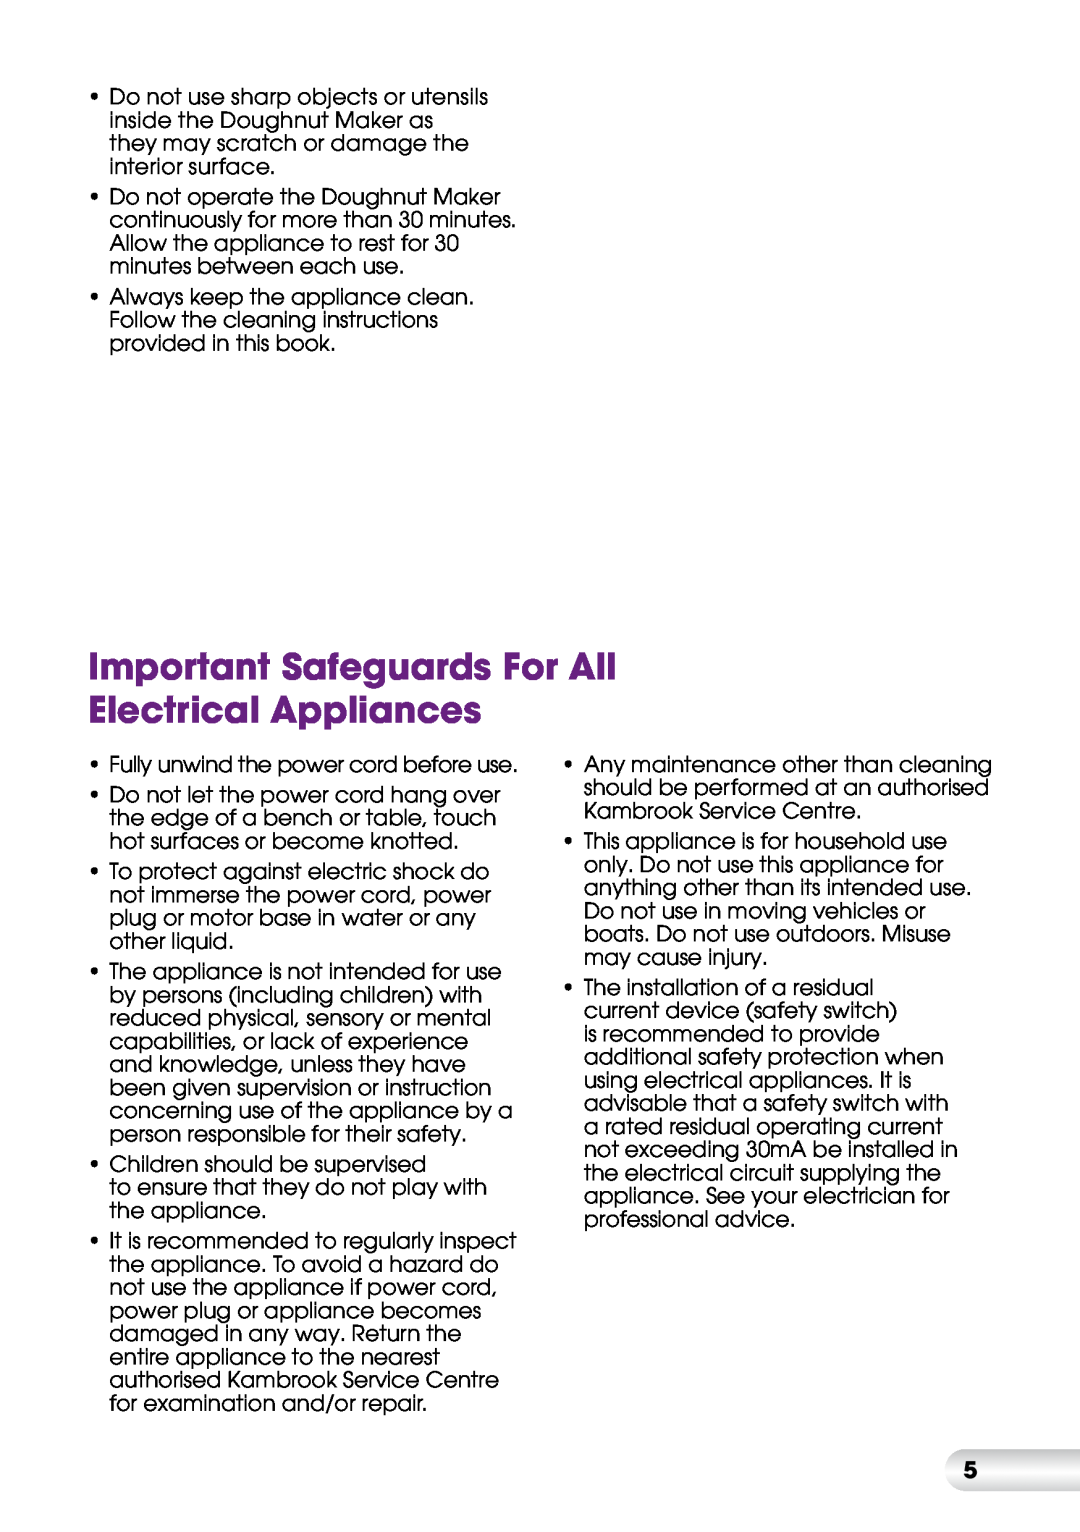 Kambrook KDM1 manual Important Safeguards For All Electrical Appliances 